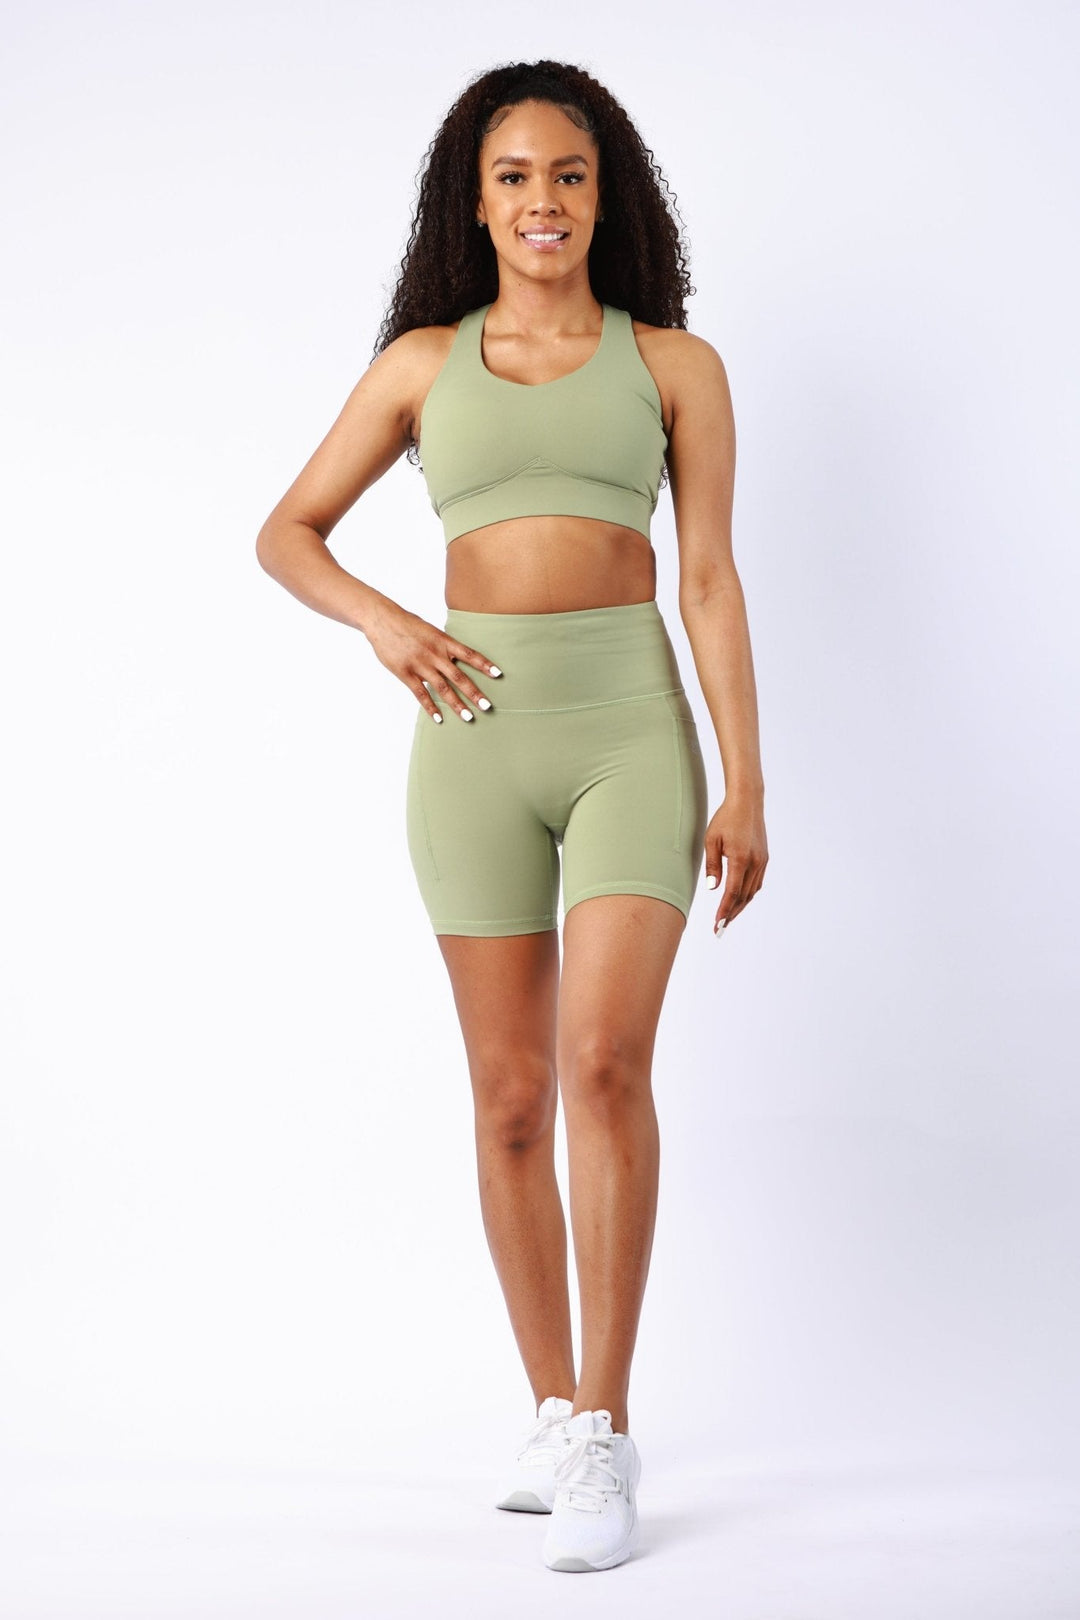 Athletic Women's Shorts With Pockets In Oil Green - attivousa Free Shipping over $75 Womens Activewear Attivo